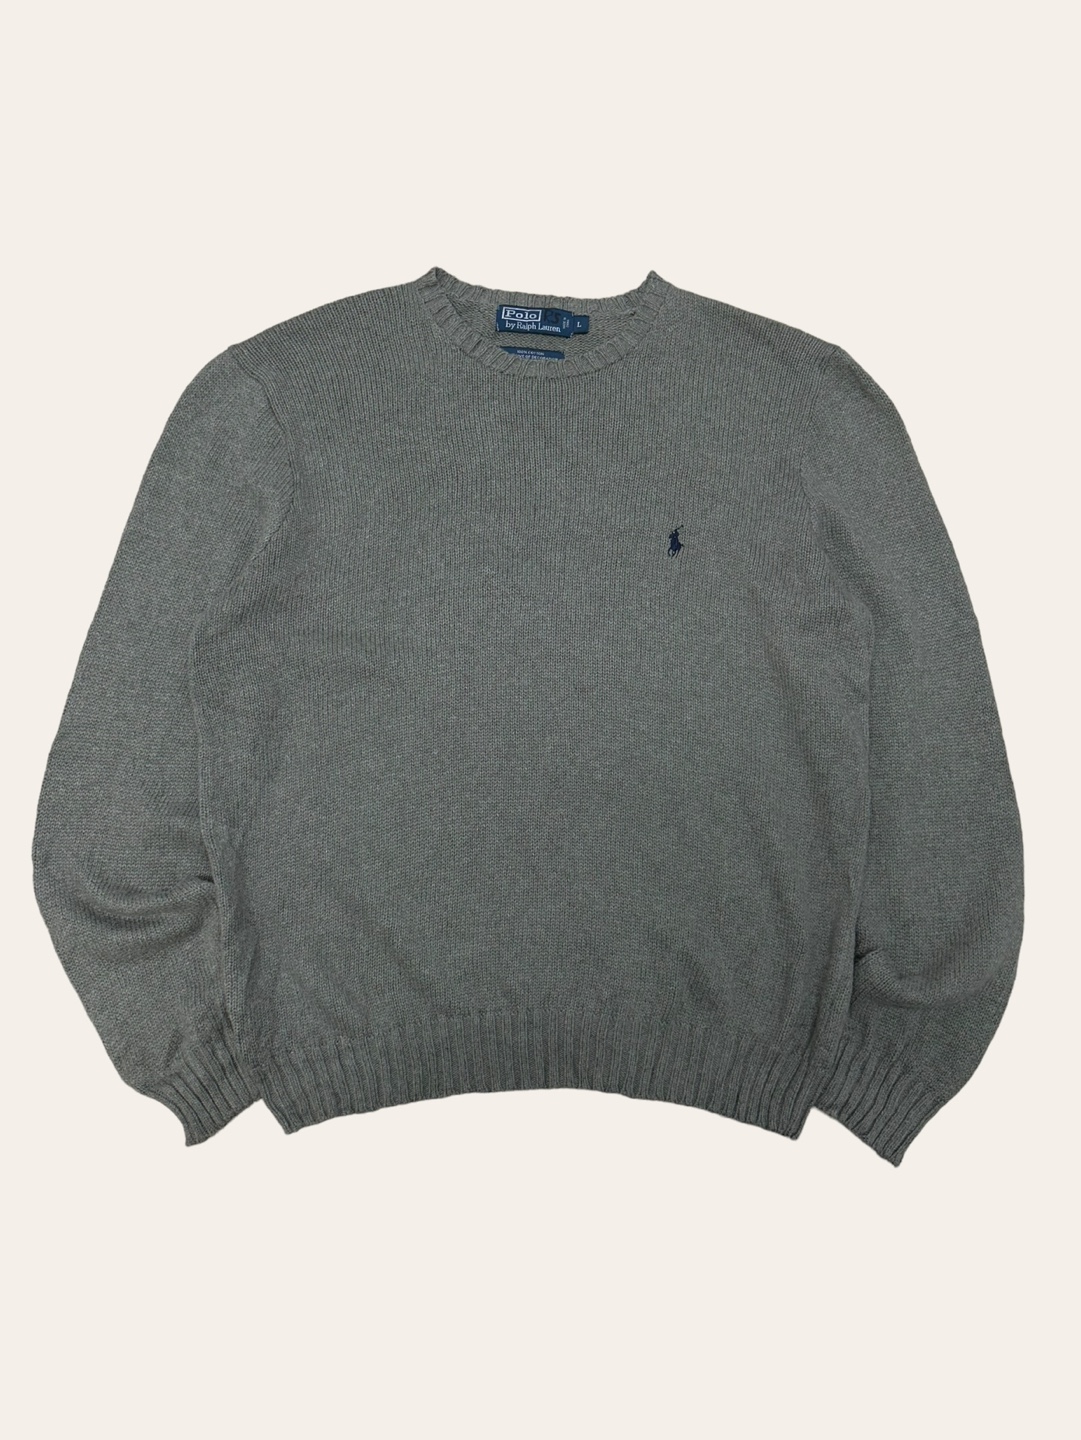 (From USA)Polo ralph lauren gray cotton crewneck sweater L